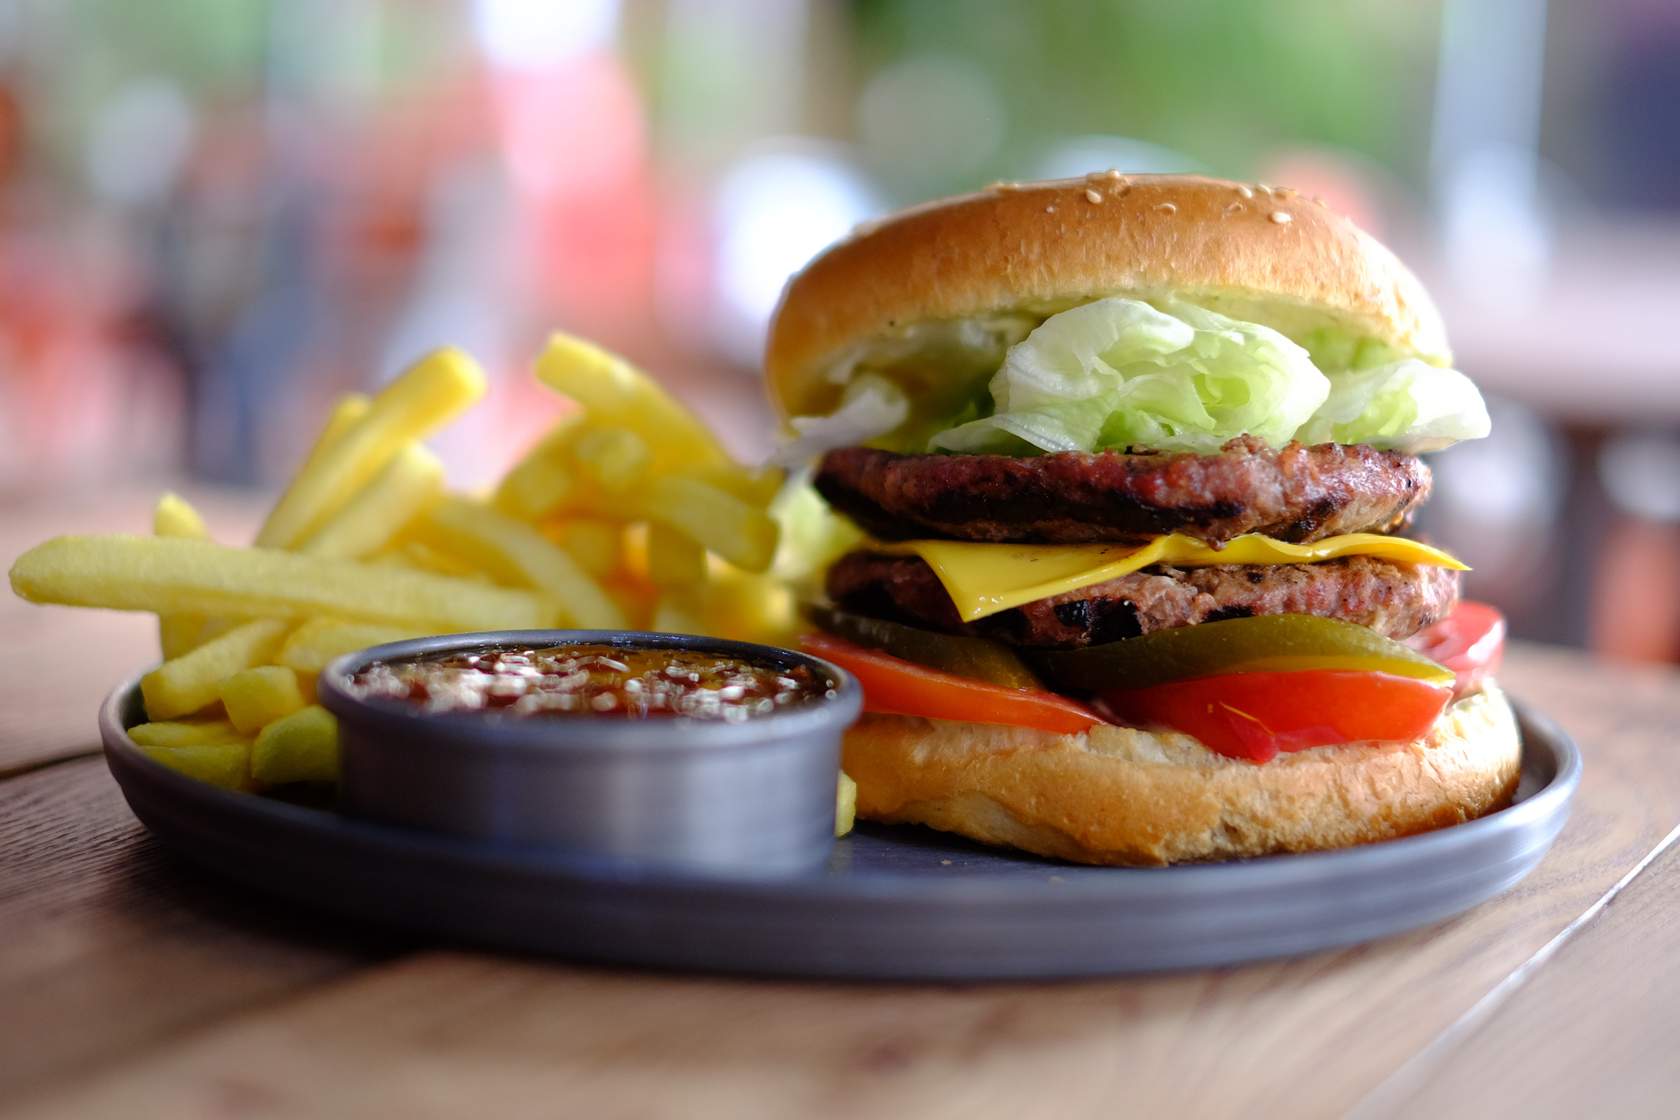 A burger with fries on a plate, demonstrating sample psychological functions of stimuli.